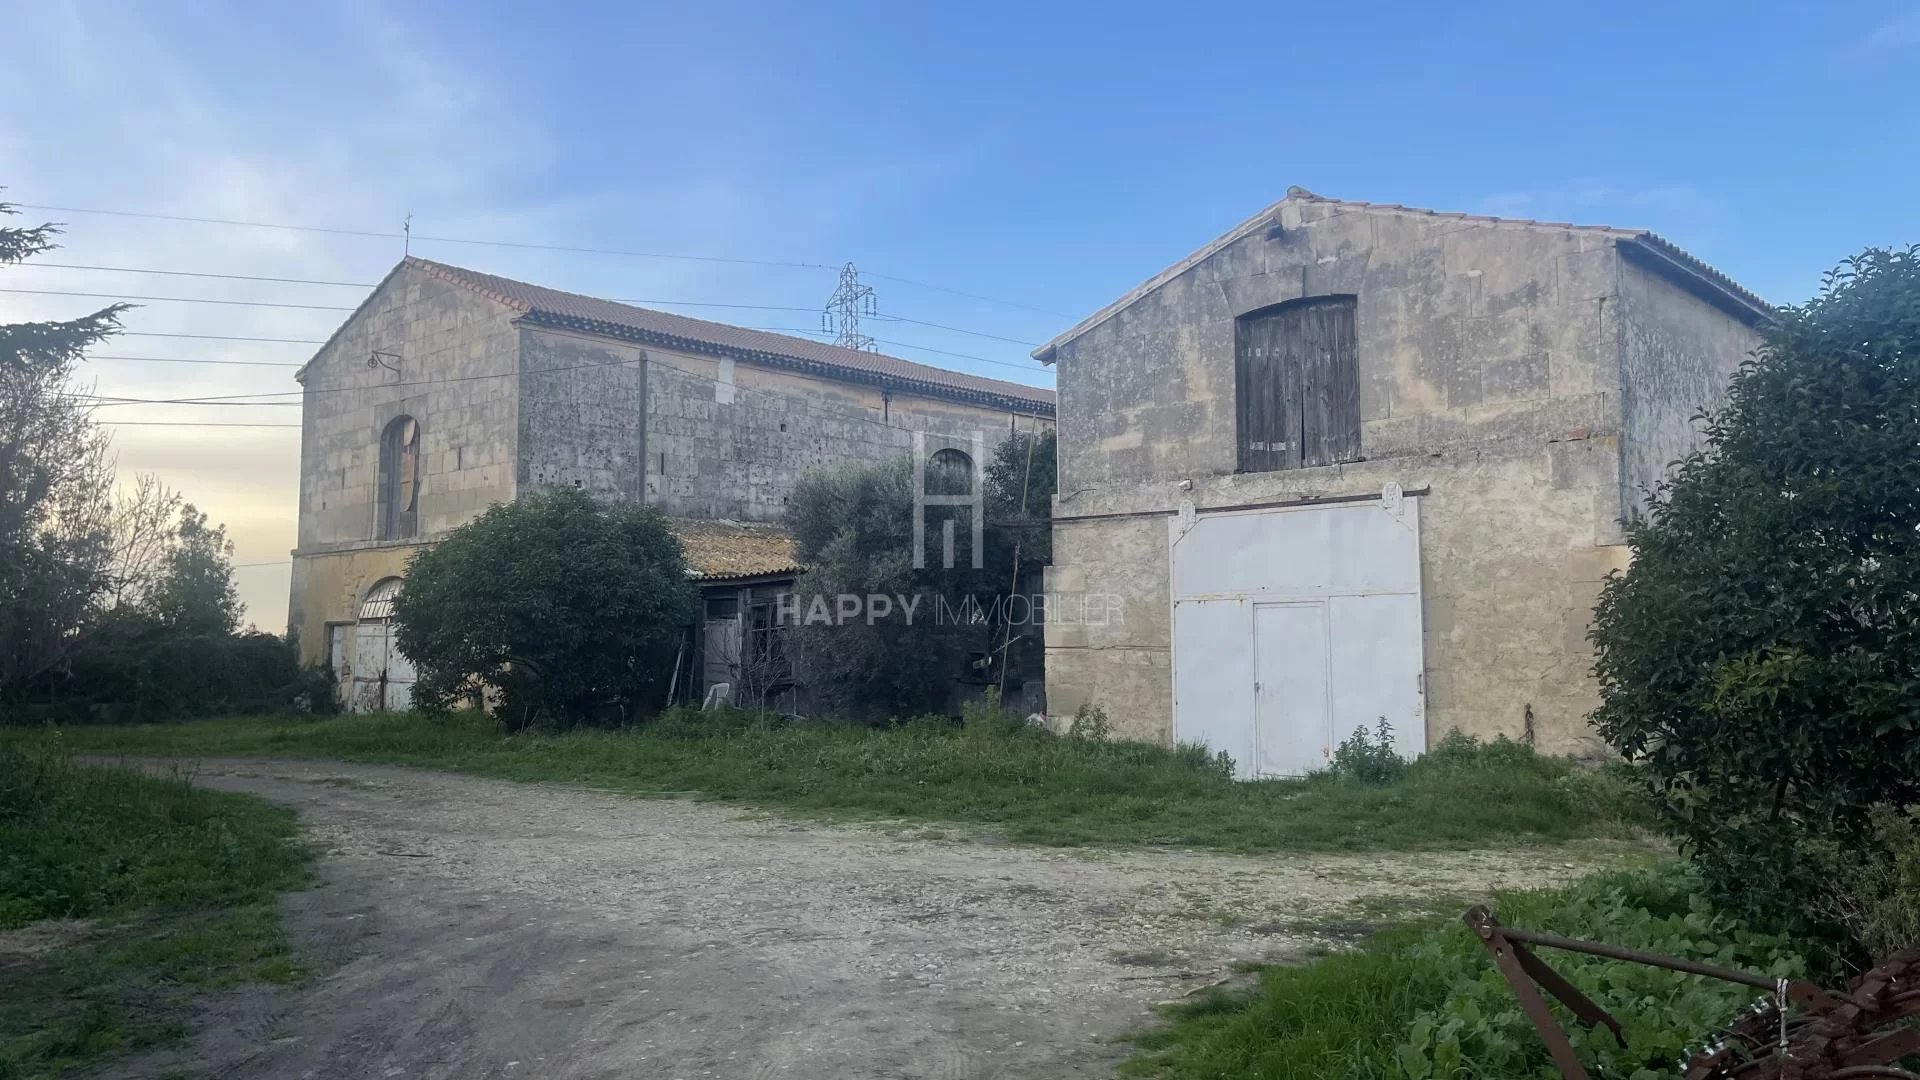 Property to restore with its outbuildings